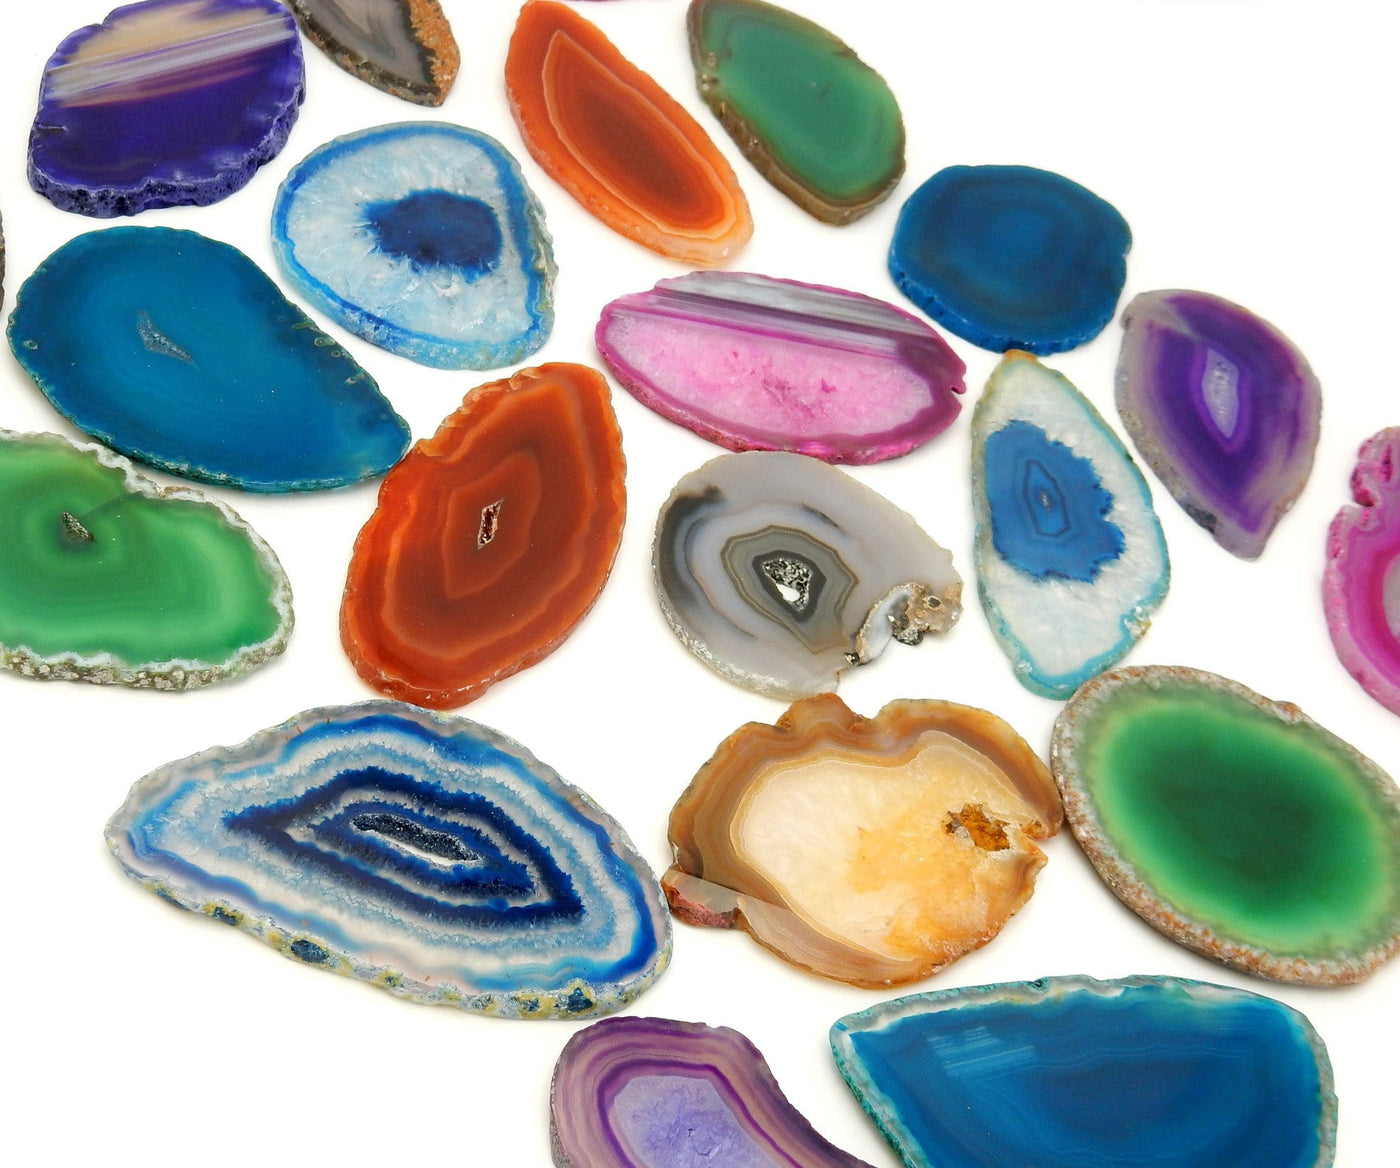 This Picture is showing the multiple colors we have available for our size 0 agate slices, also being displayed on a white background.